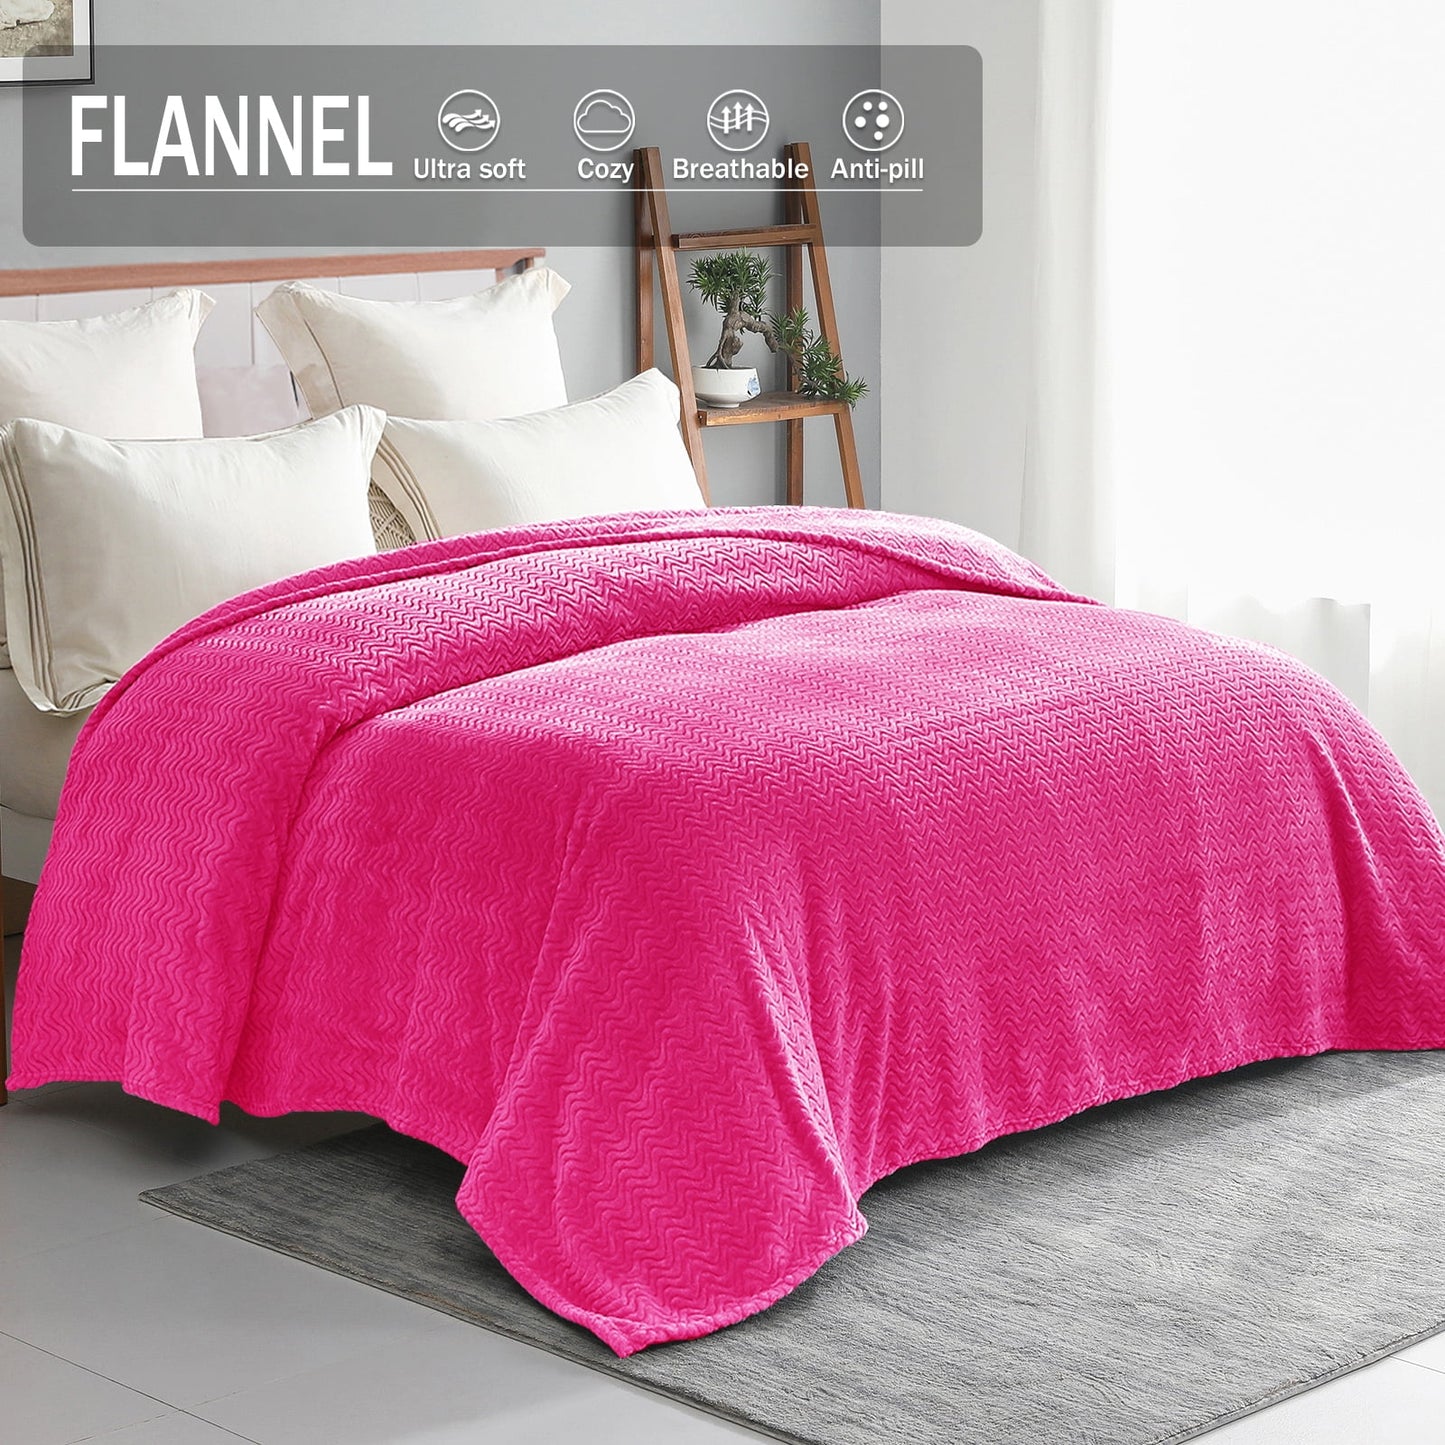 Exclusivo Mezcla Twin Size Flannel Fleece Blanket, 90x66 Inches Soft Jacquard Weave Wave Pattern Velvet Plush Blanket for Bed, Cozy, Warm, Lightweight and Decorative Hot Pink Blanket